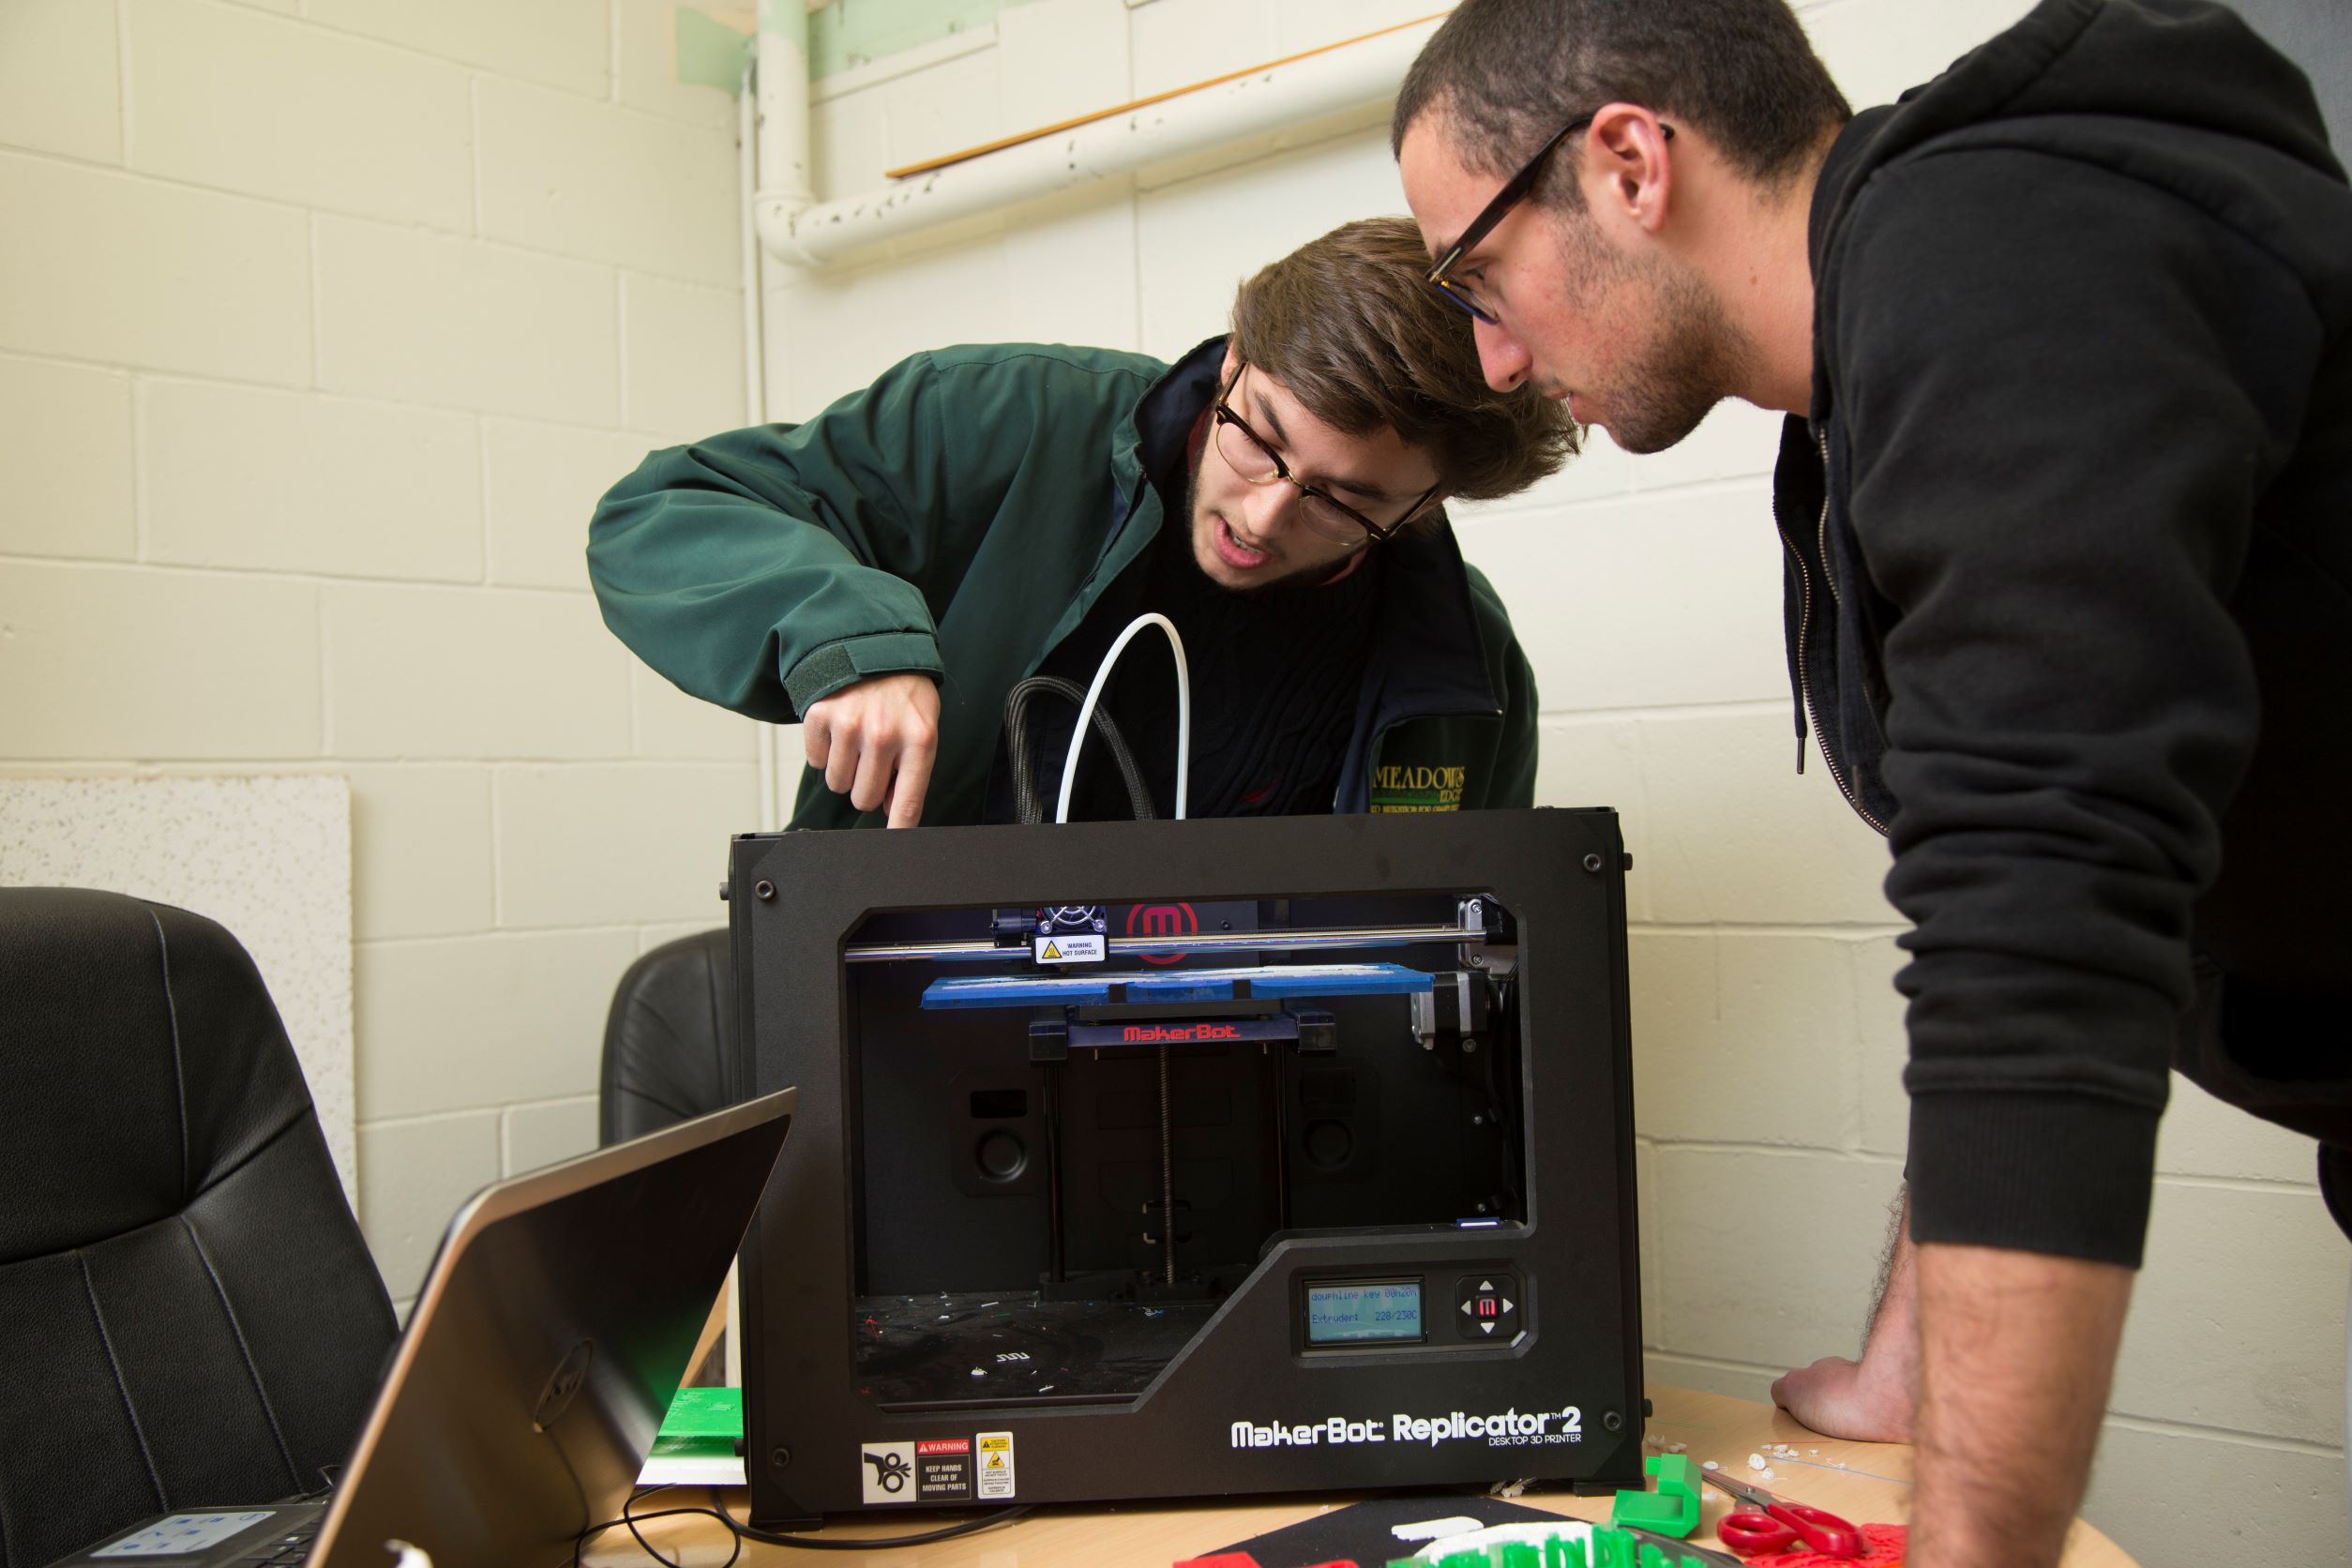 Two engineering students working on a replicator machine.